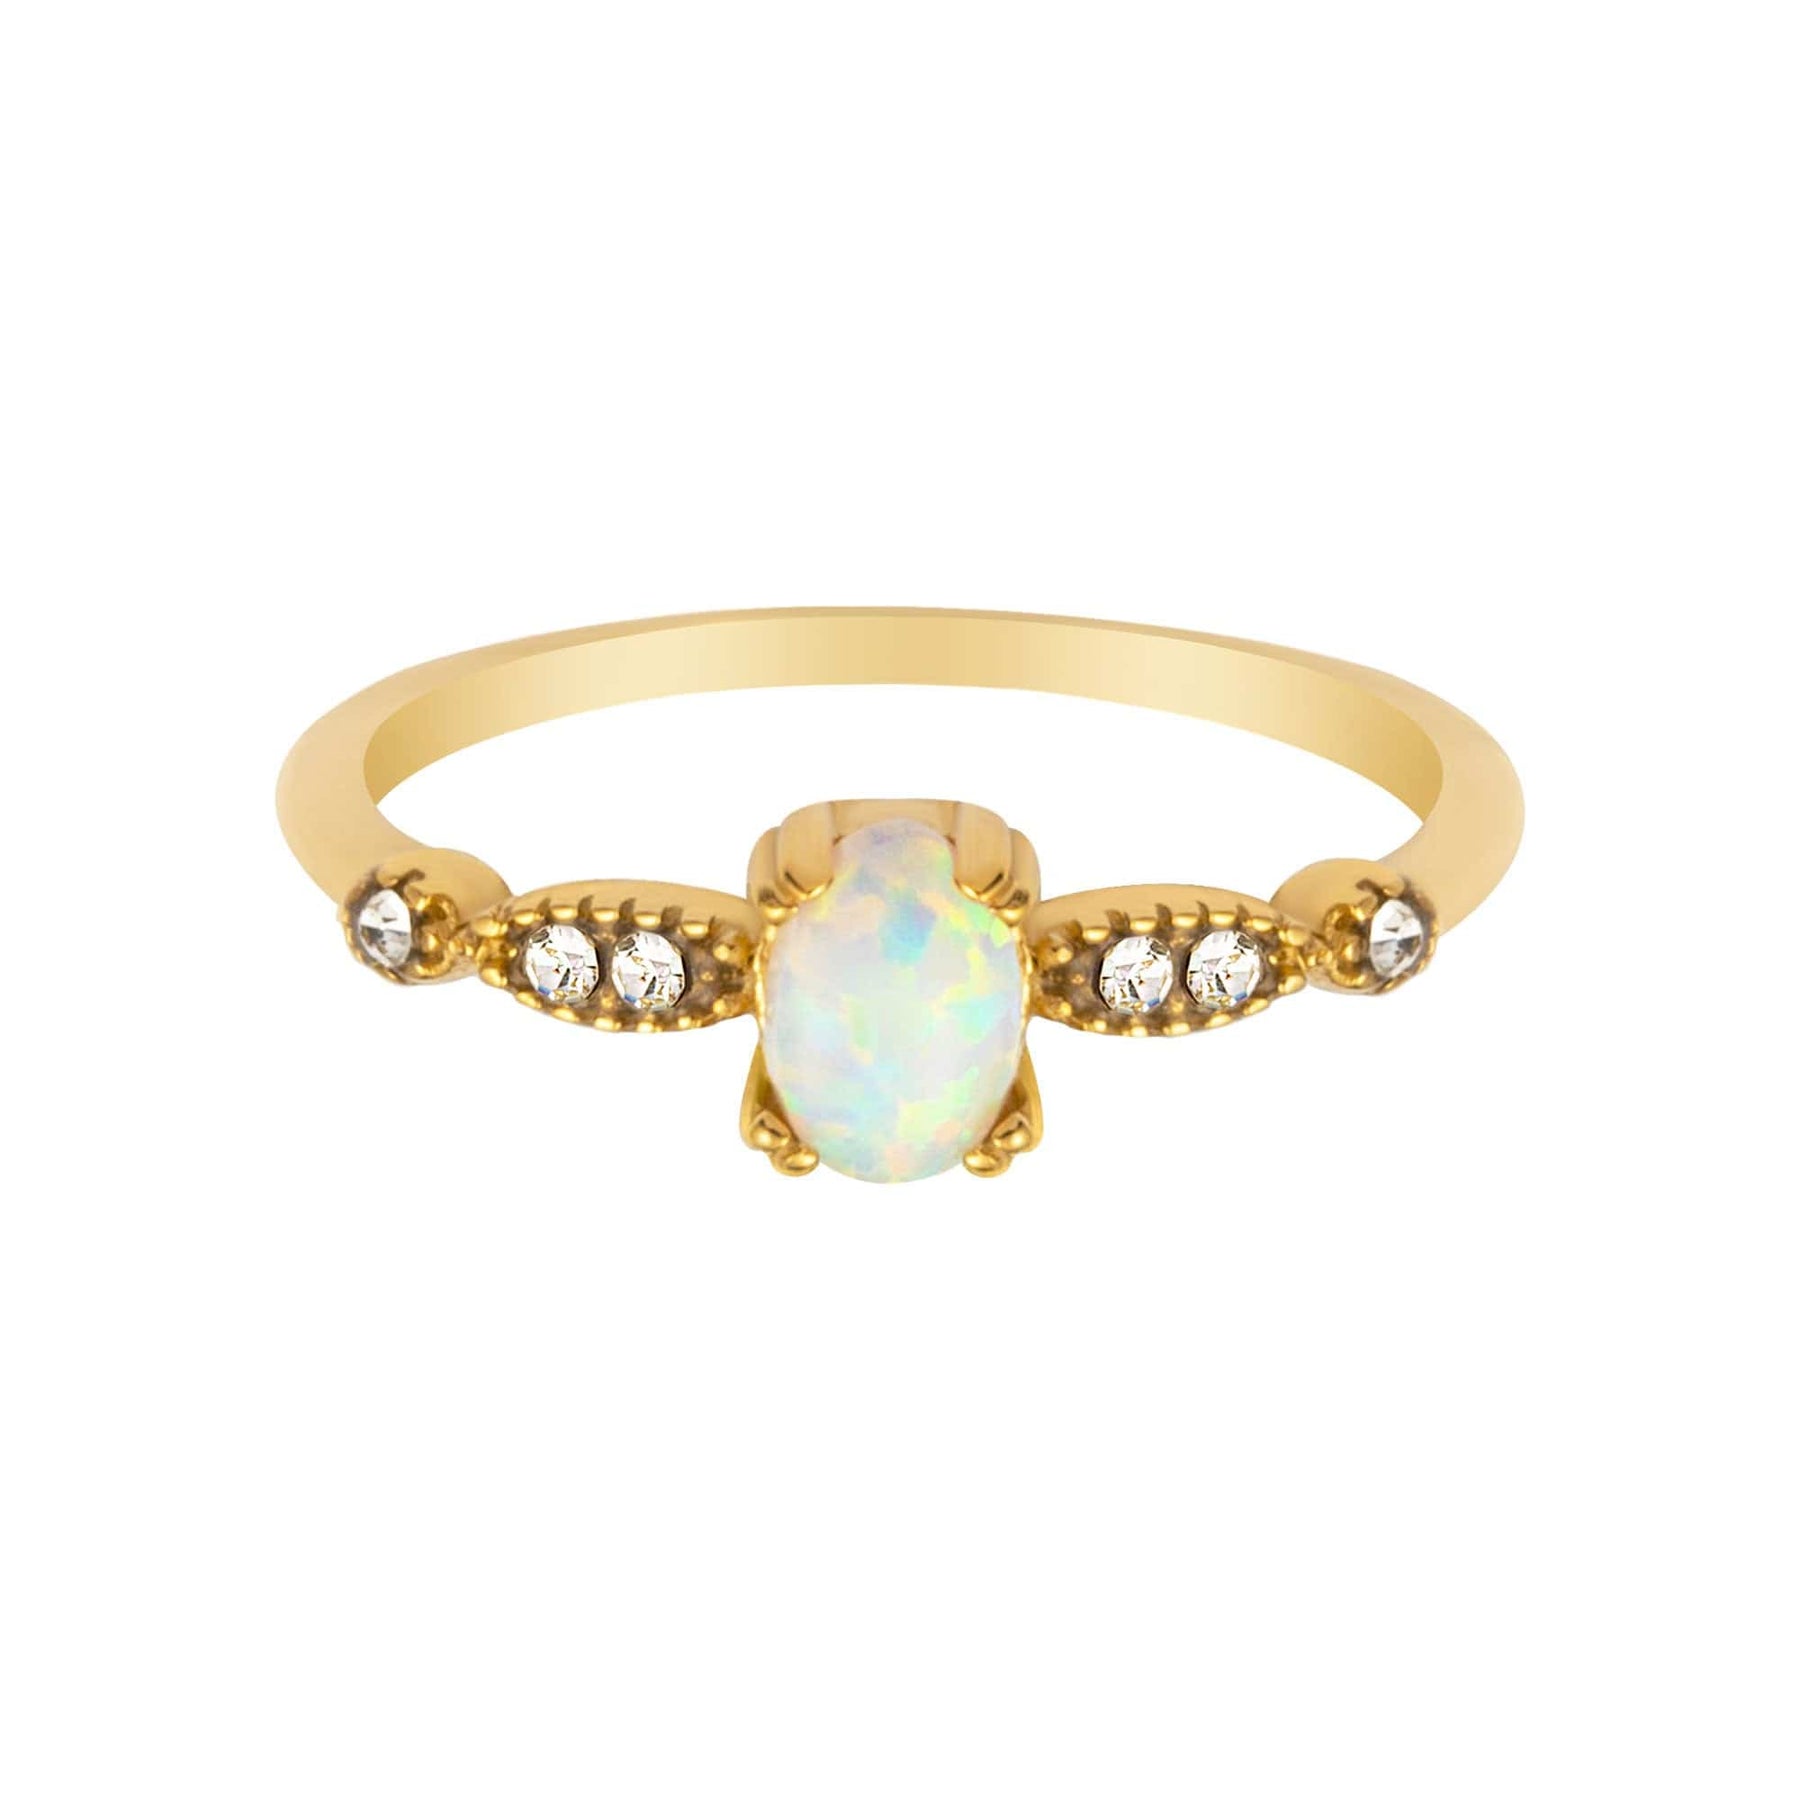 BohoMoon Stainless Steel Destiny Opal Ring Gold / US 6 / UK L / EUR 51 (small)